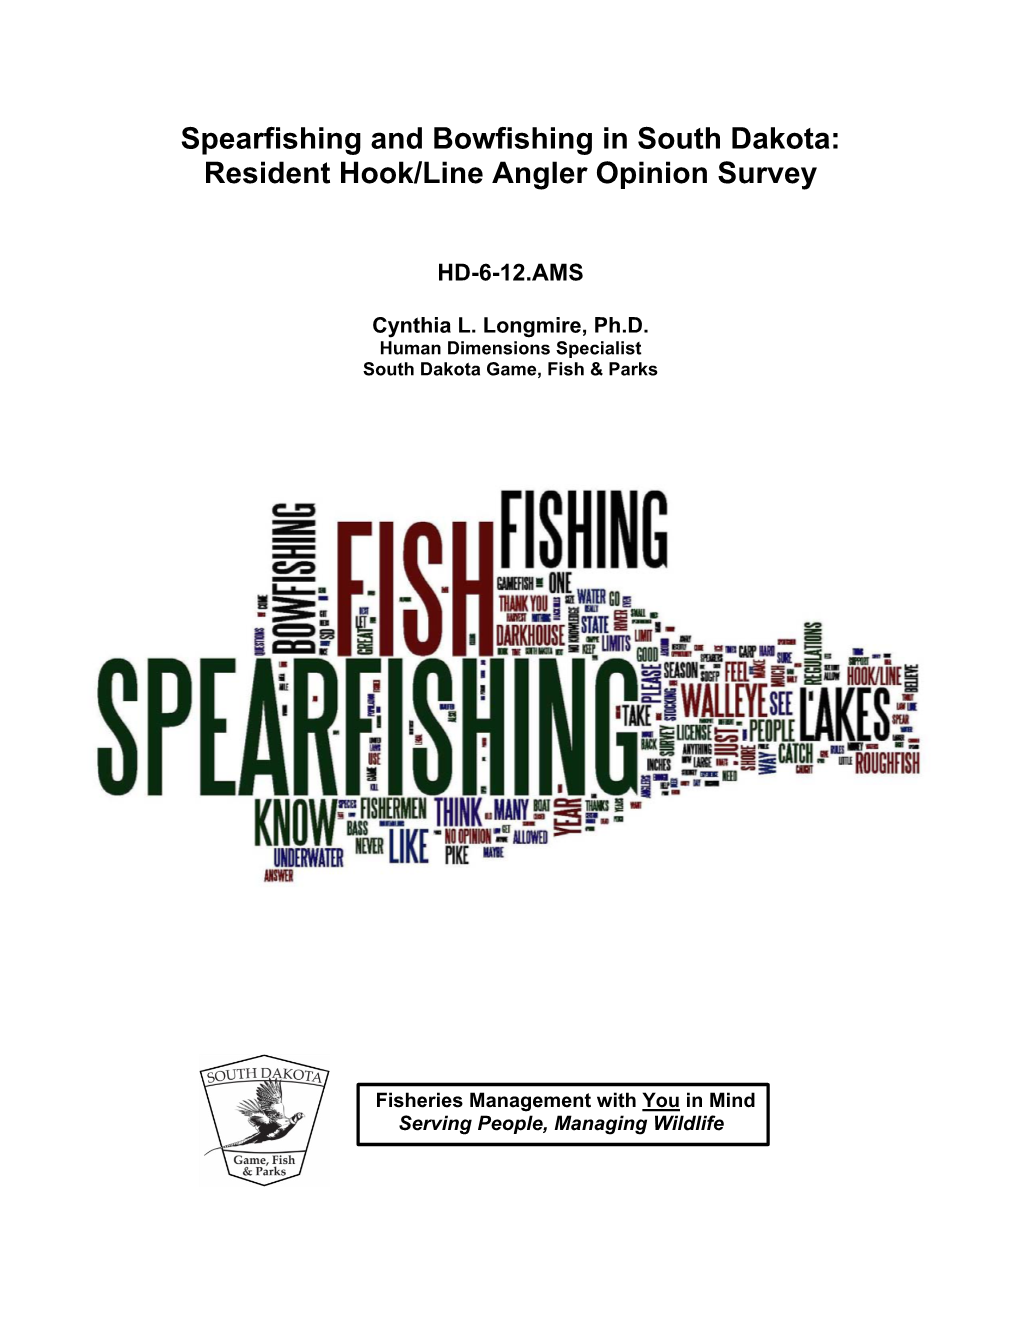 Spearfishing and Bowfishing in South Dakota: Resident Hook/Line Angler Opinion Survey